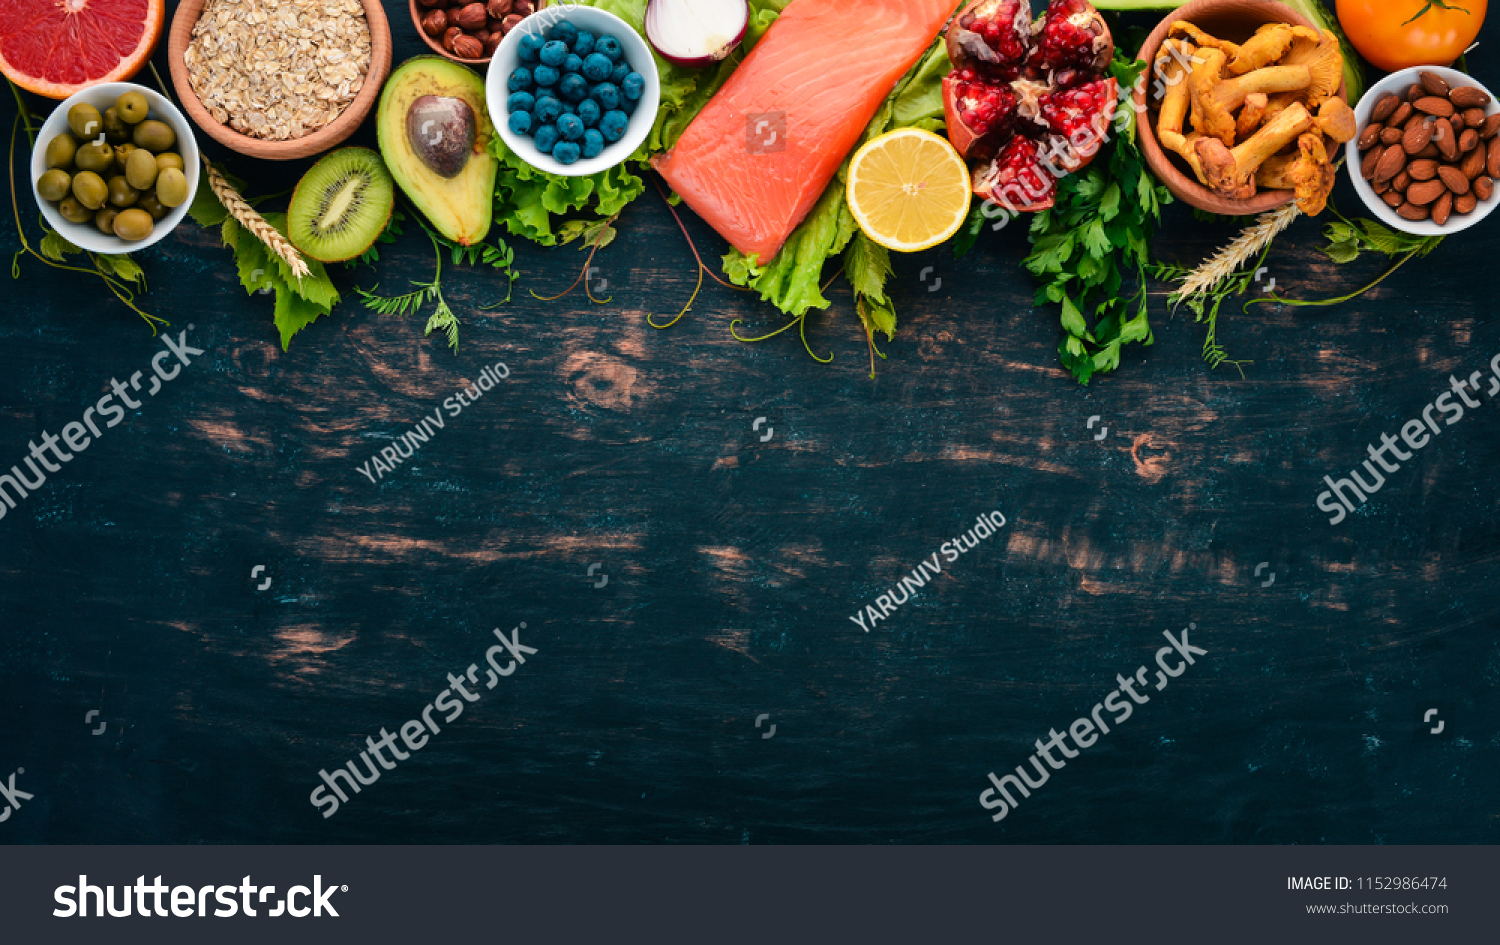 A set of healthy food. Fish, nuts, protein, berries, vegetables and fruits. On a black wooden background. Top view. Free space for text. #1152986474